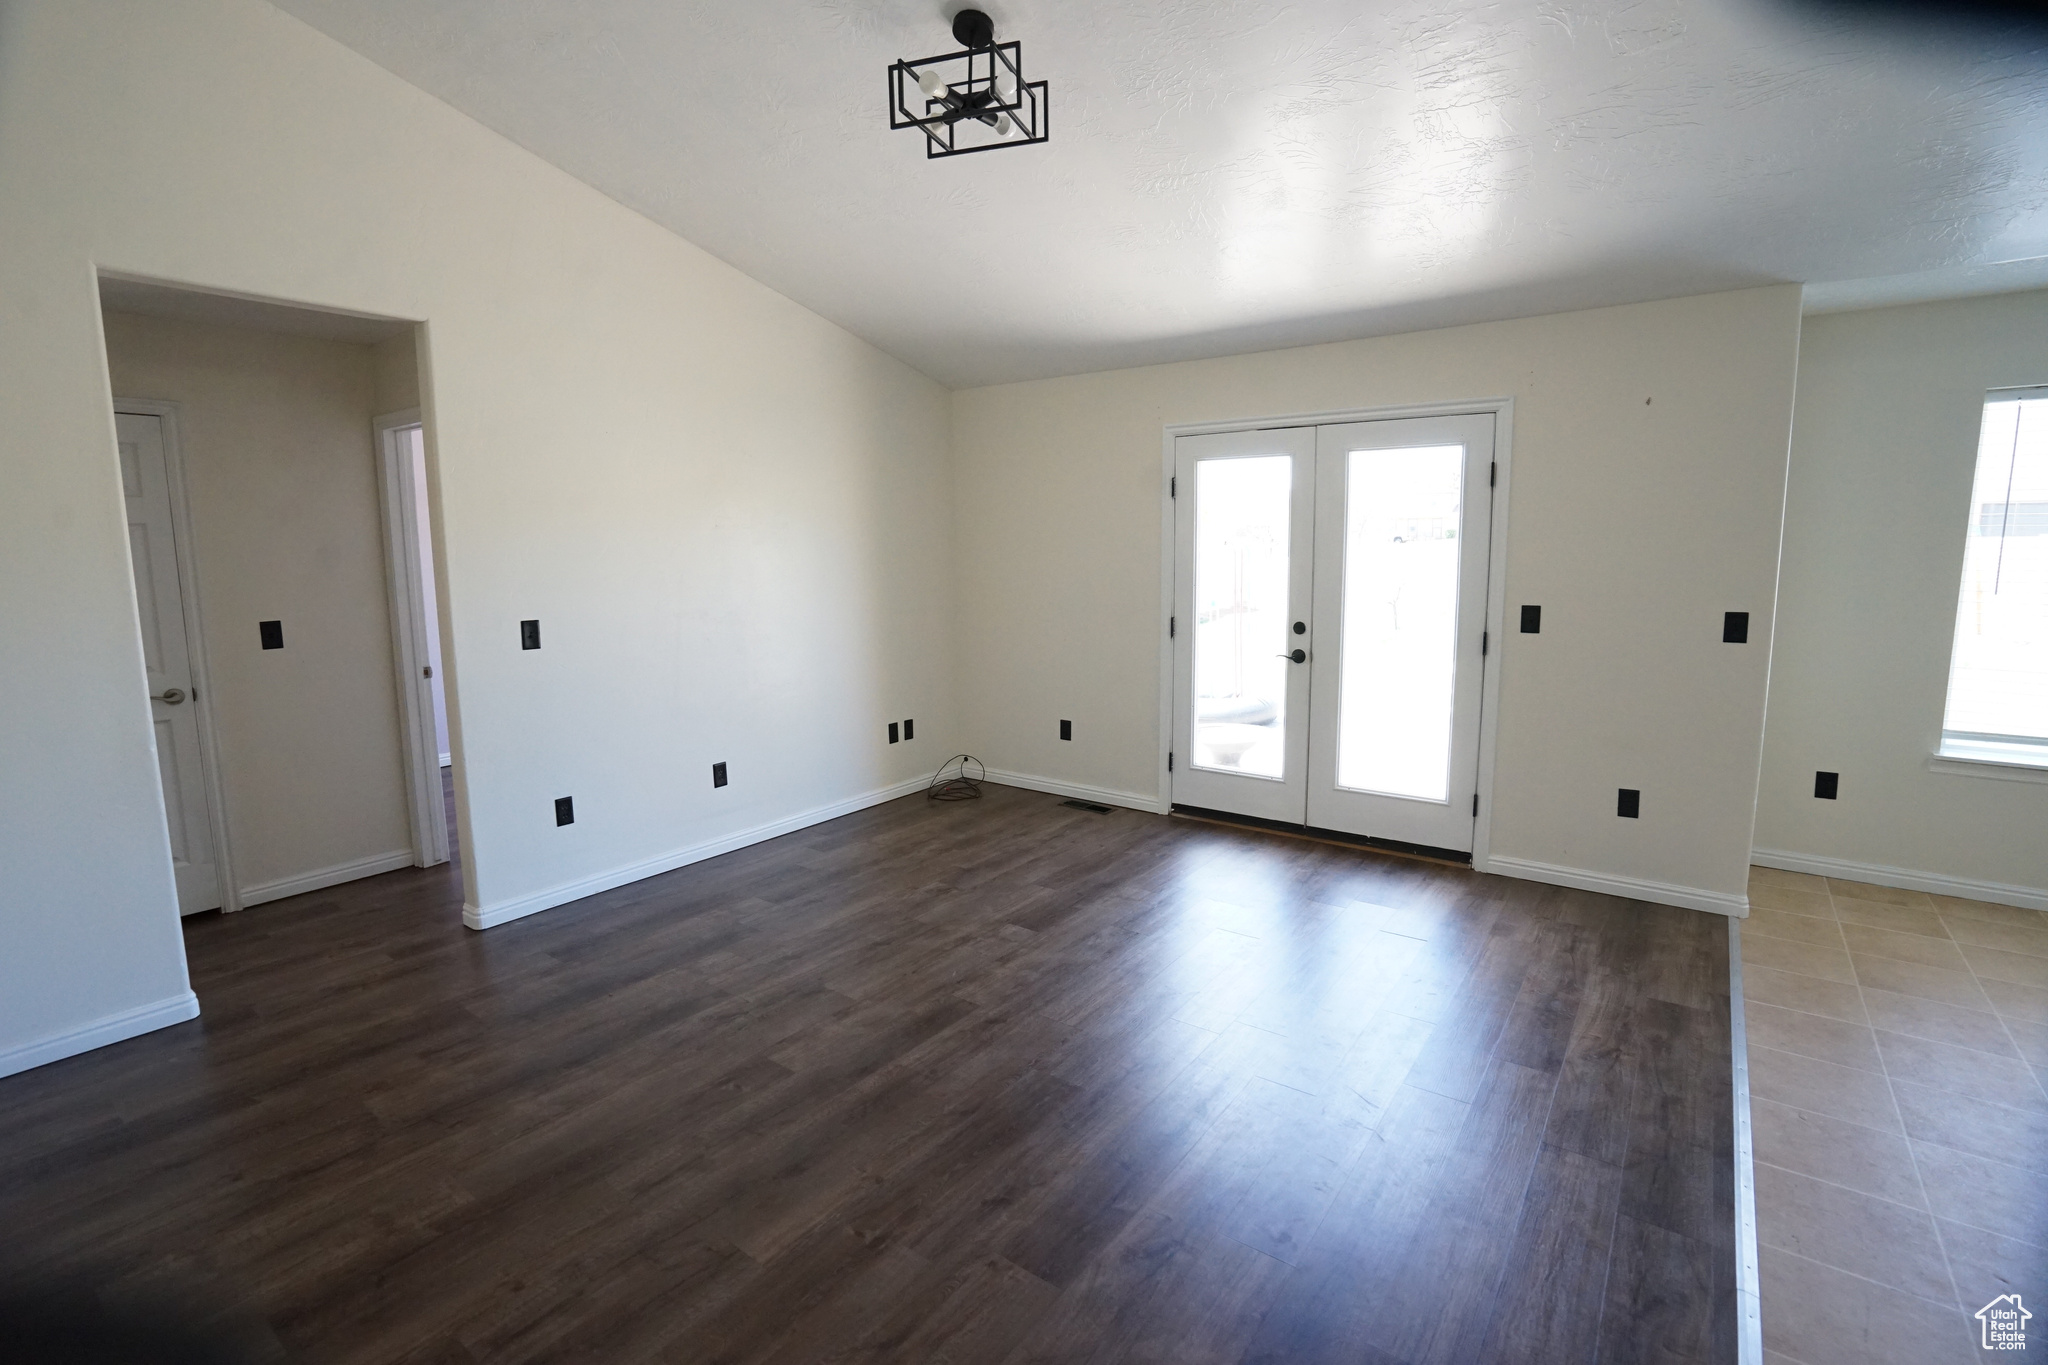 Unfurnished room featuring lofted ceiling, french doors, and dark tile flooring